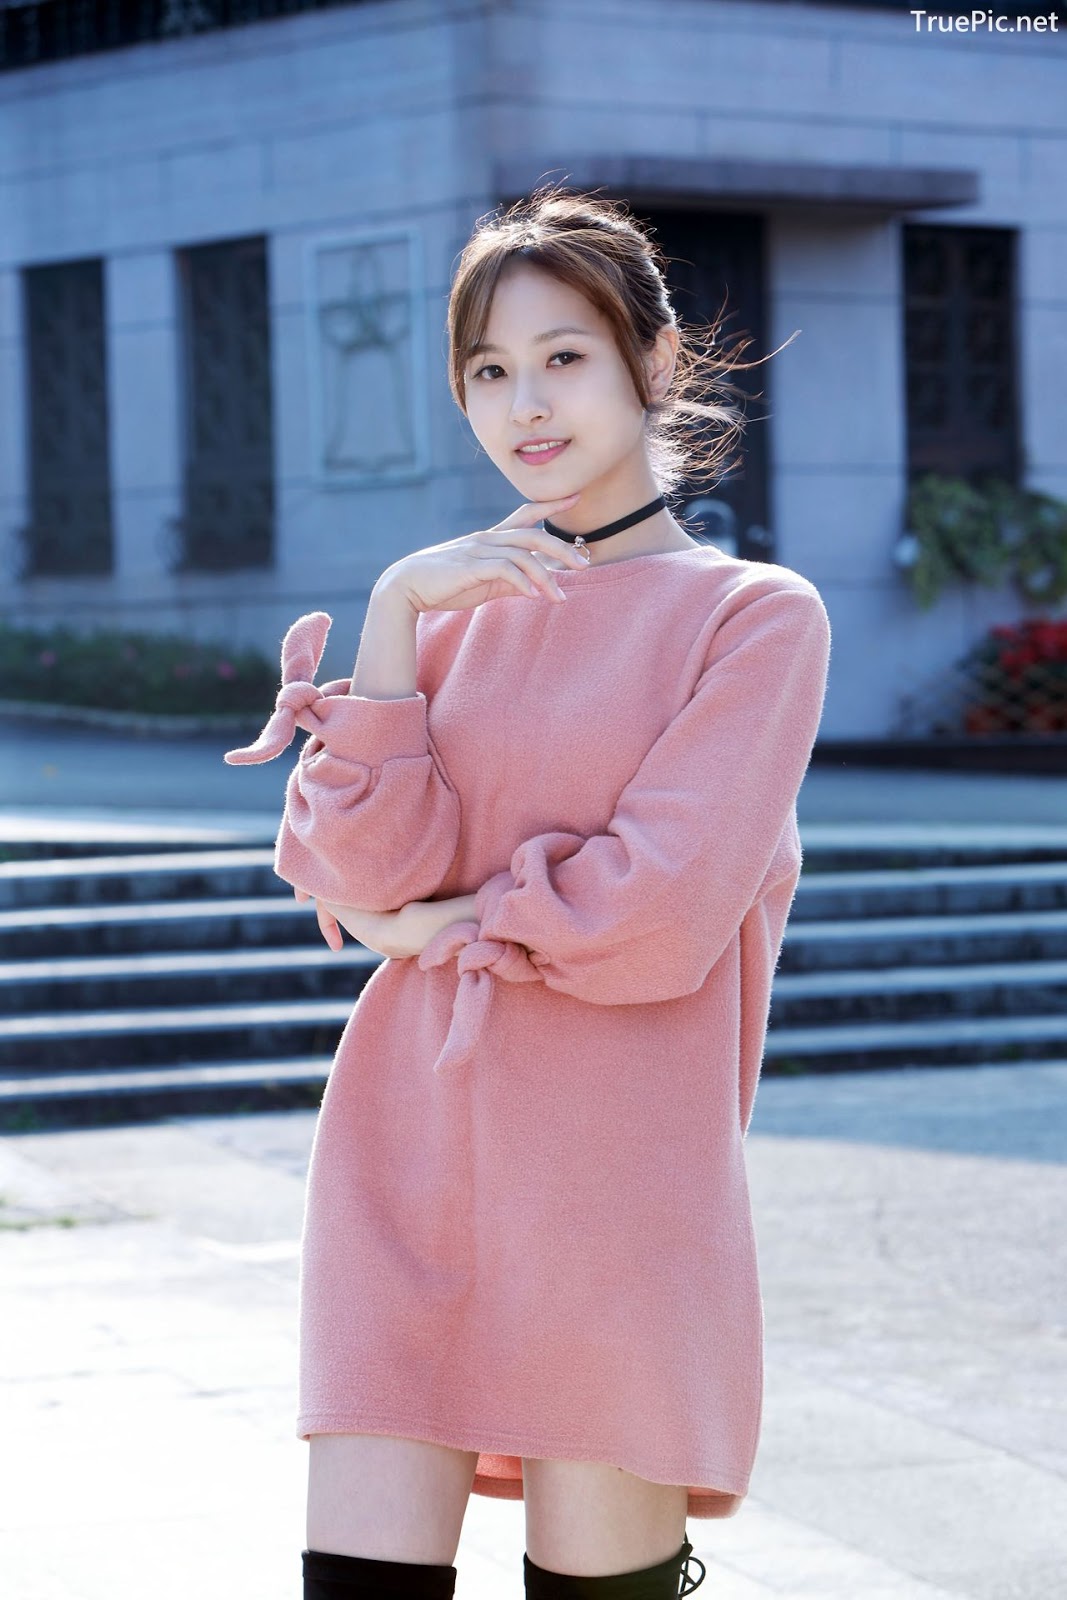 Image-Taiwanese-Model-郭思敏-Pure-And-Gorgeous-Girl-In-Pink-Sweater-Dress-TruePic.net- Picture-22